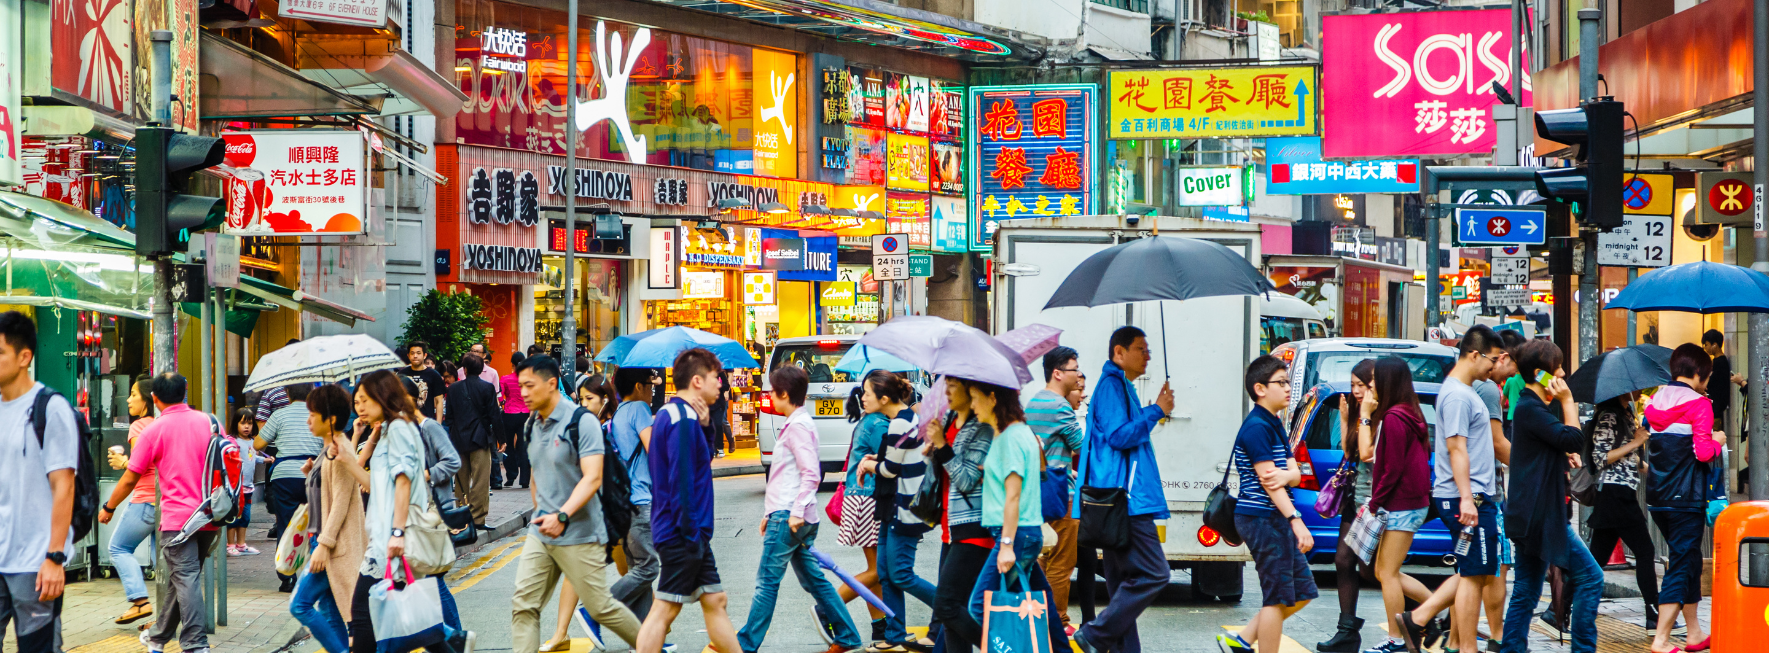 A busy and colourful street in Hong Kong with various people crossing a street, some holding umbrellas. 